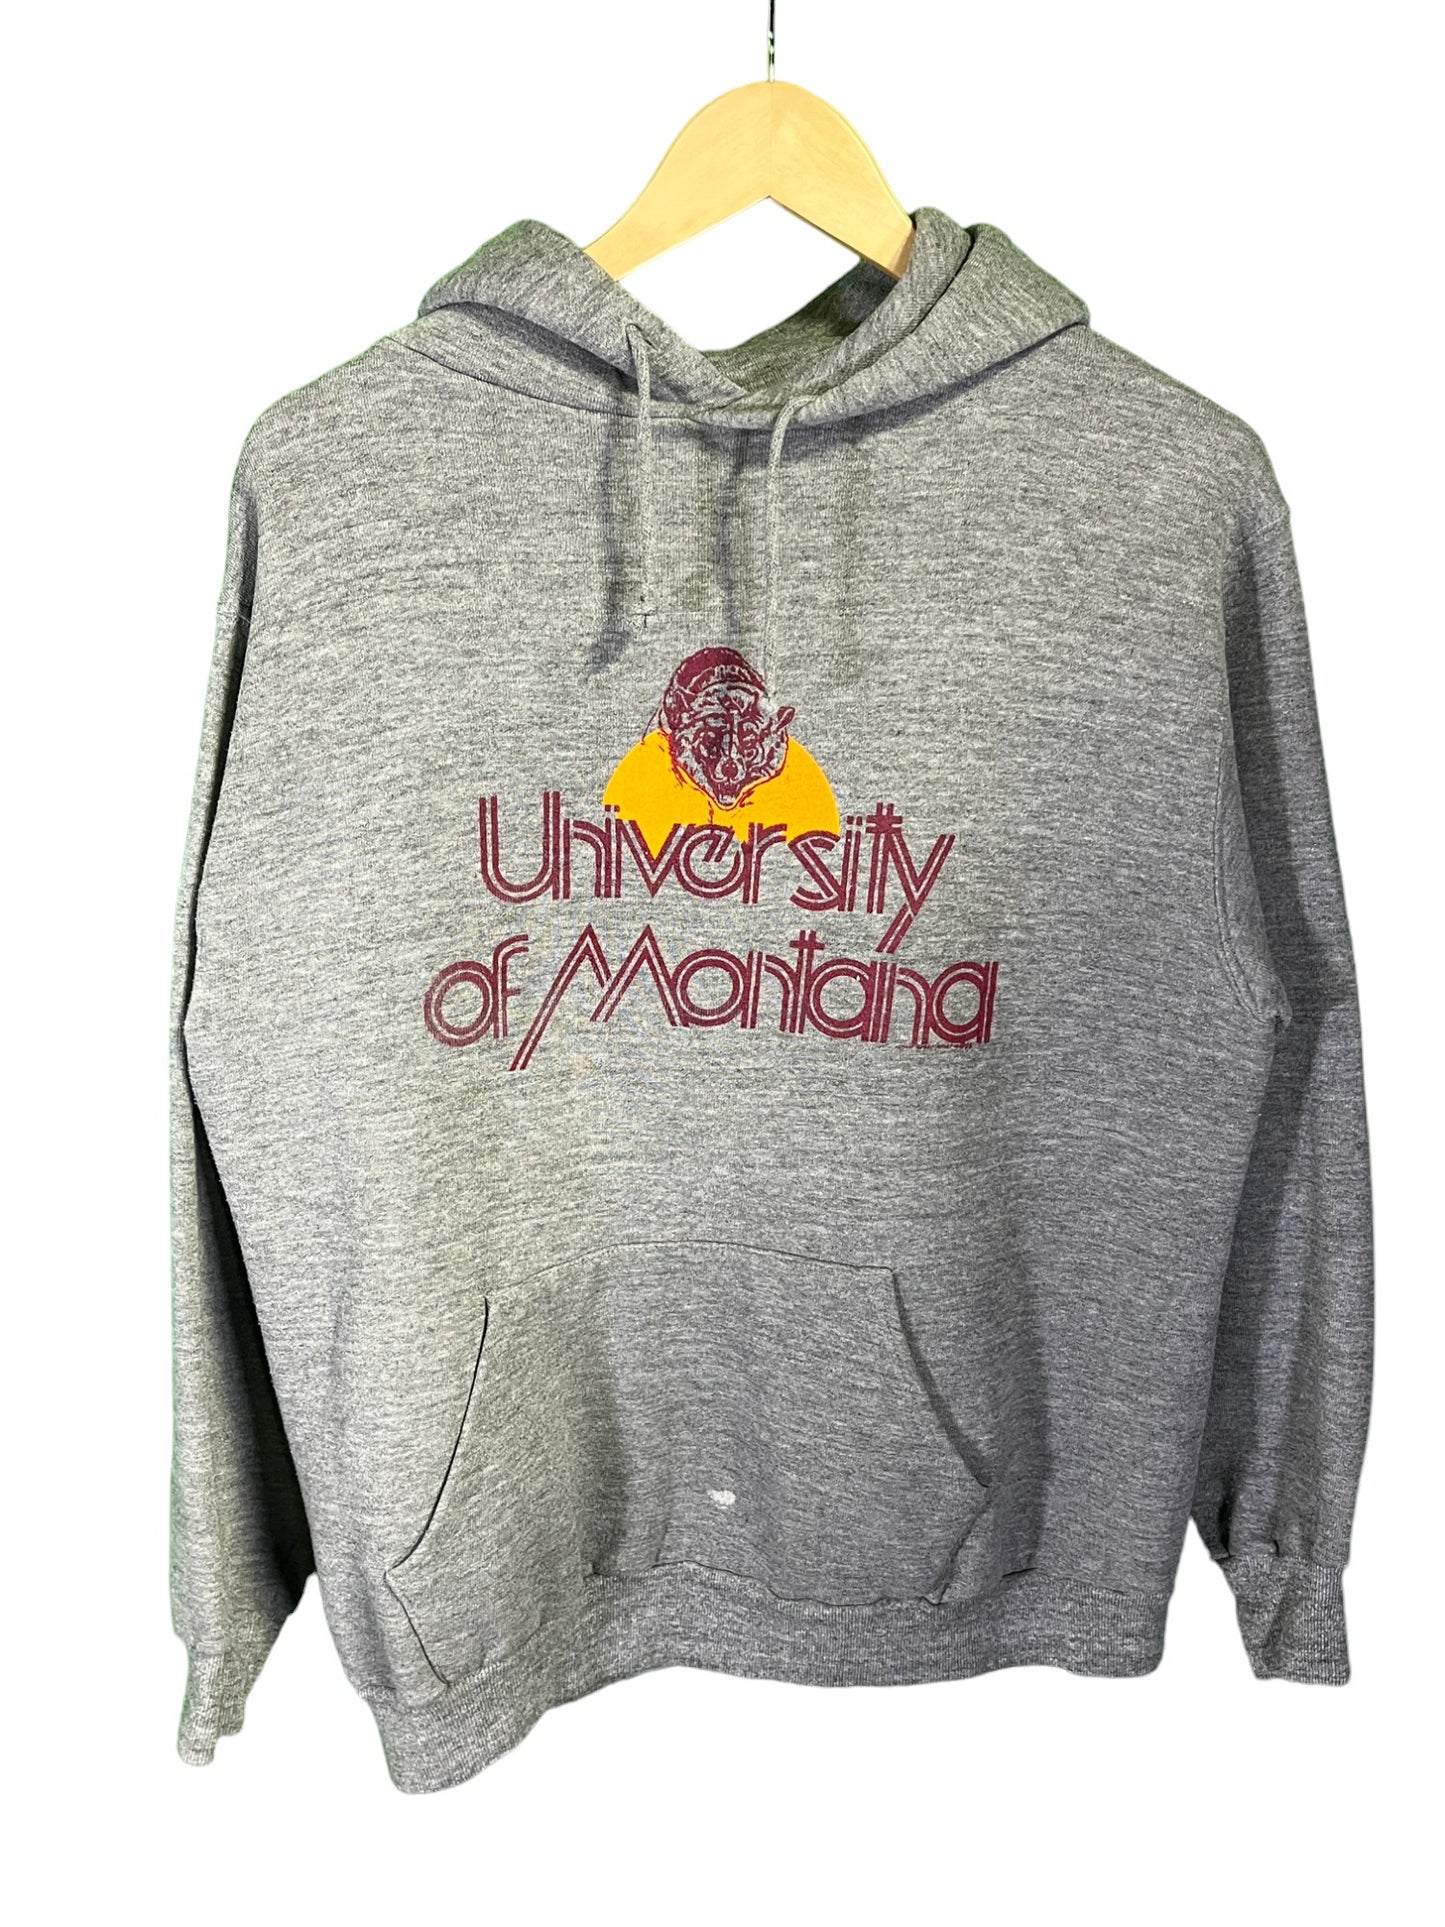 Vintage 90's Russell Athletic University of Montana Grey Hoodie Size Large